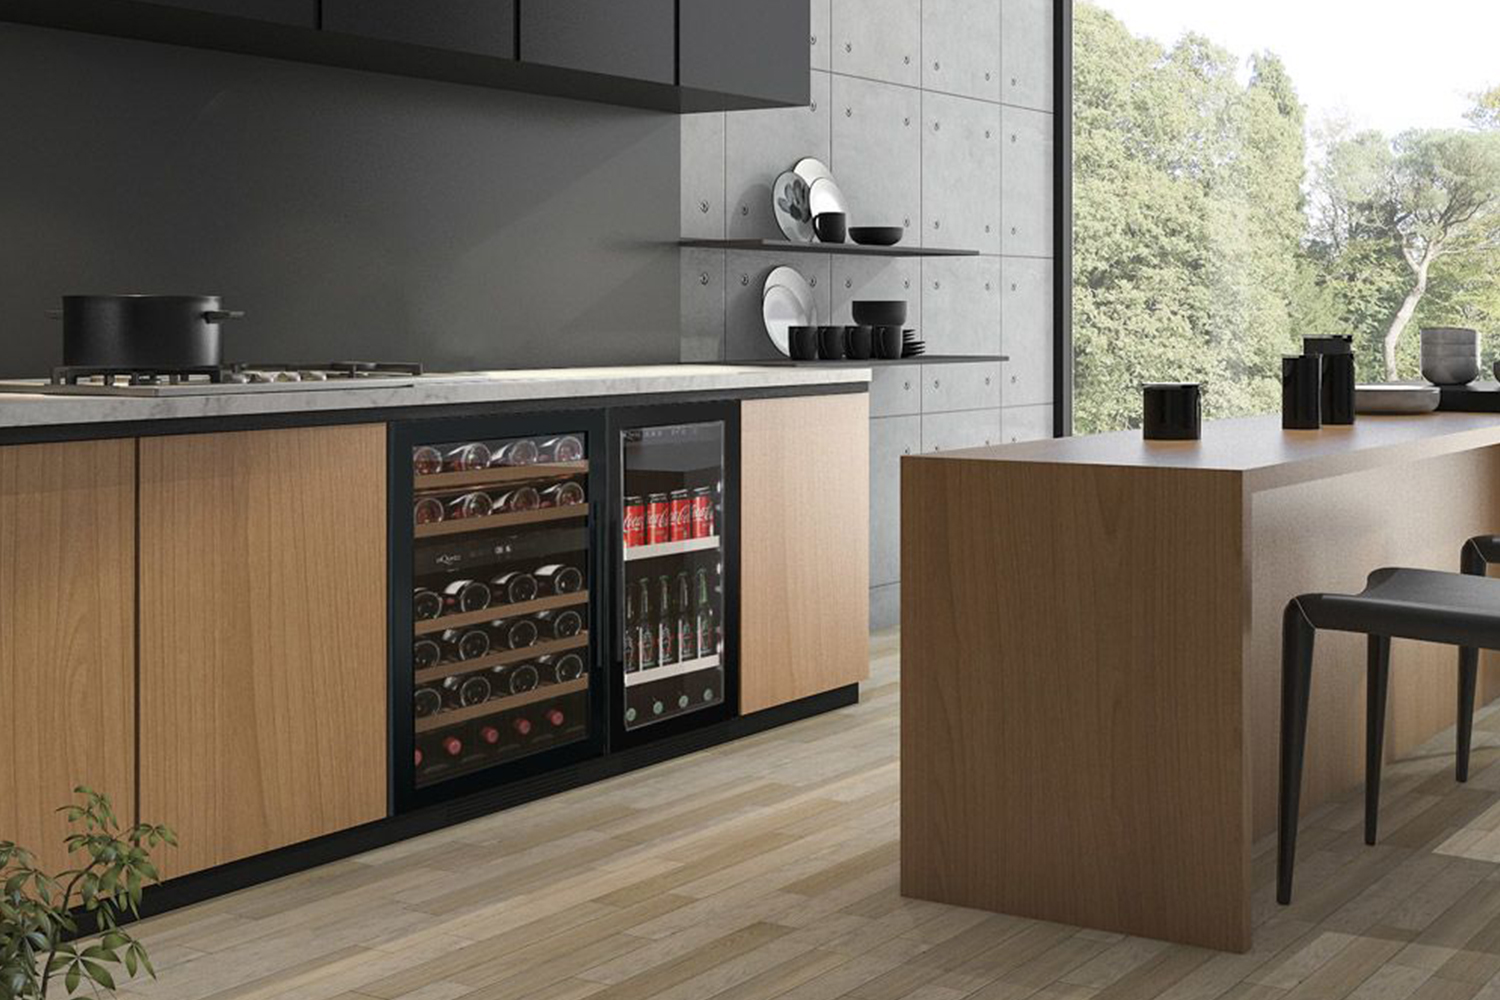 A wine cooler and beer cooler from brand mquvee